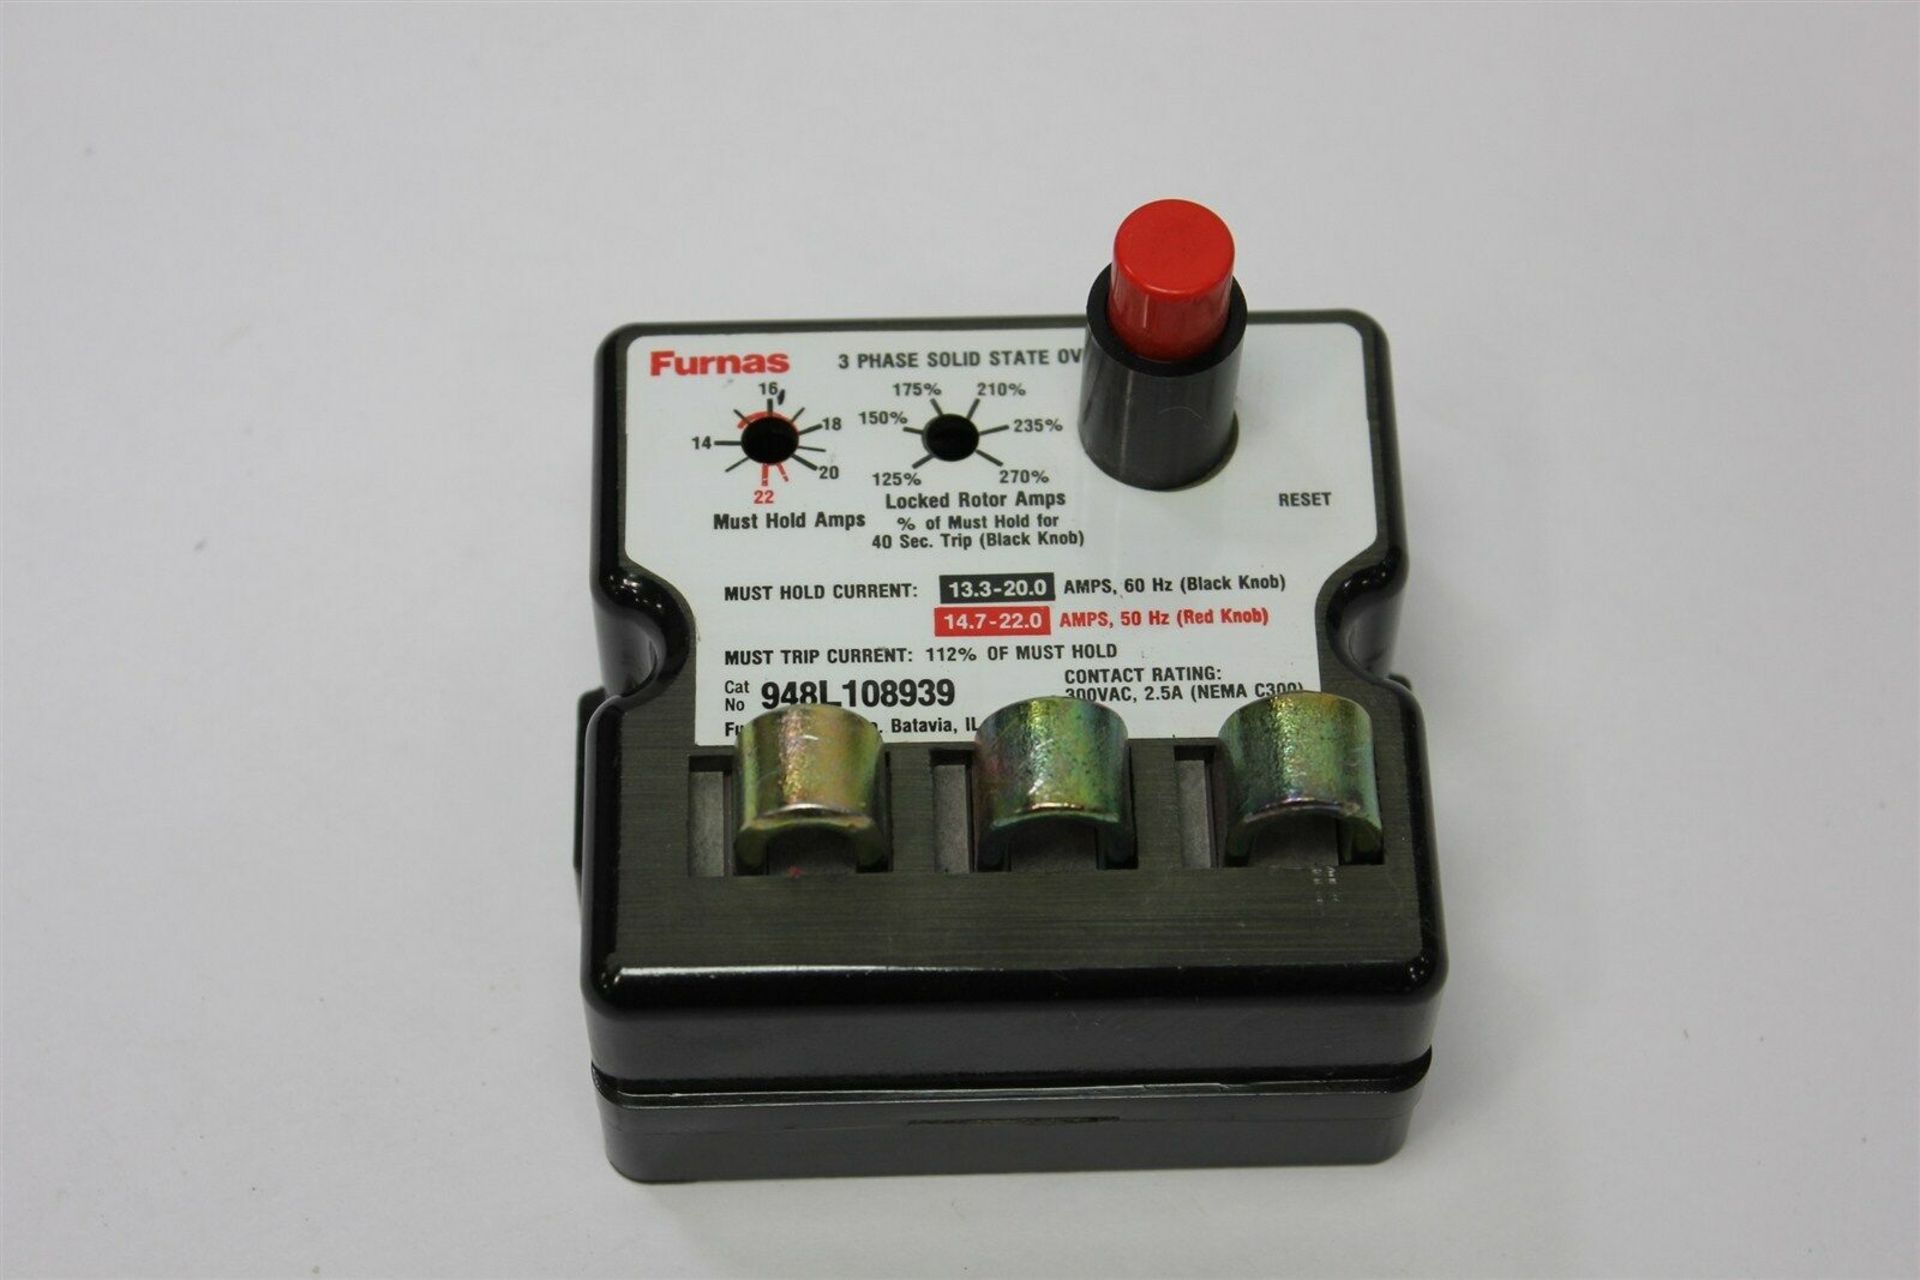 FURNAS SOLID STATE OVERLOAD RELAY